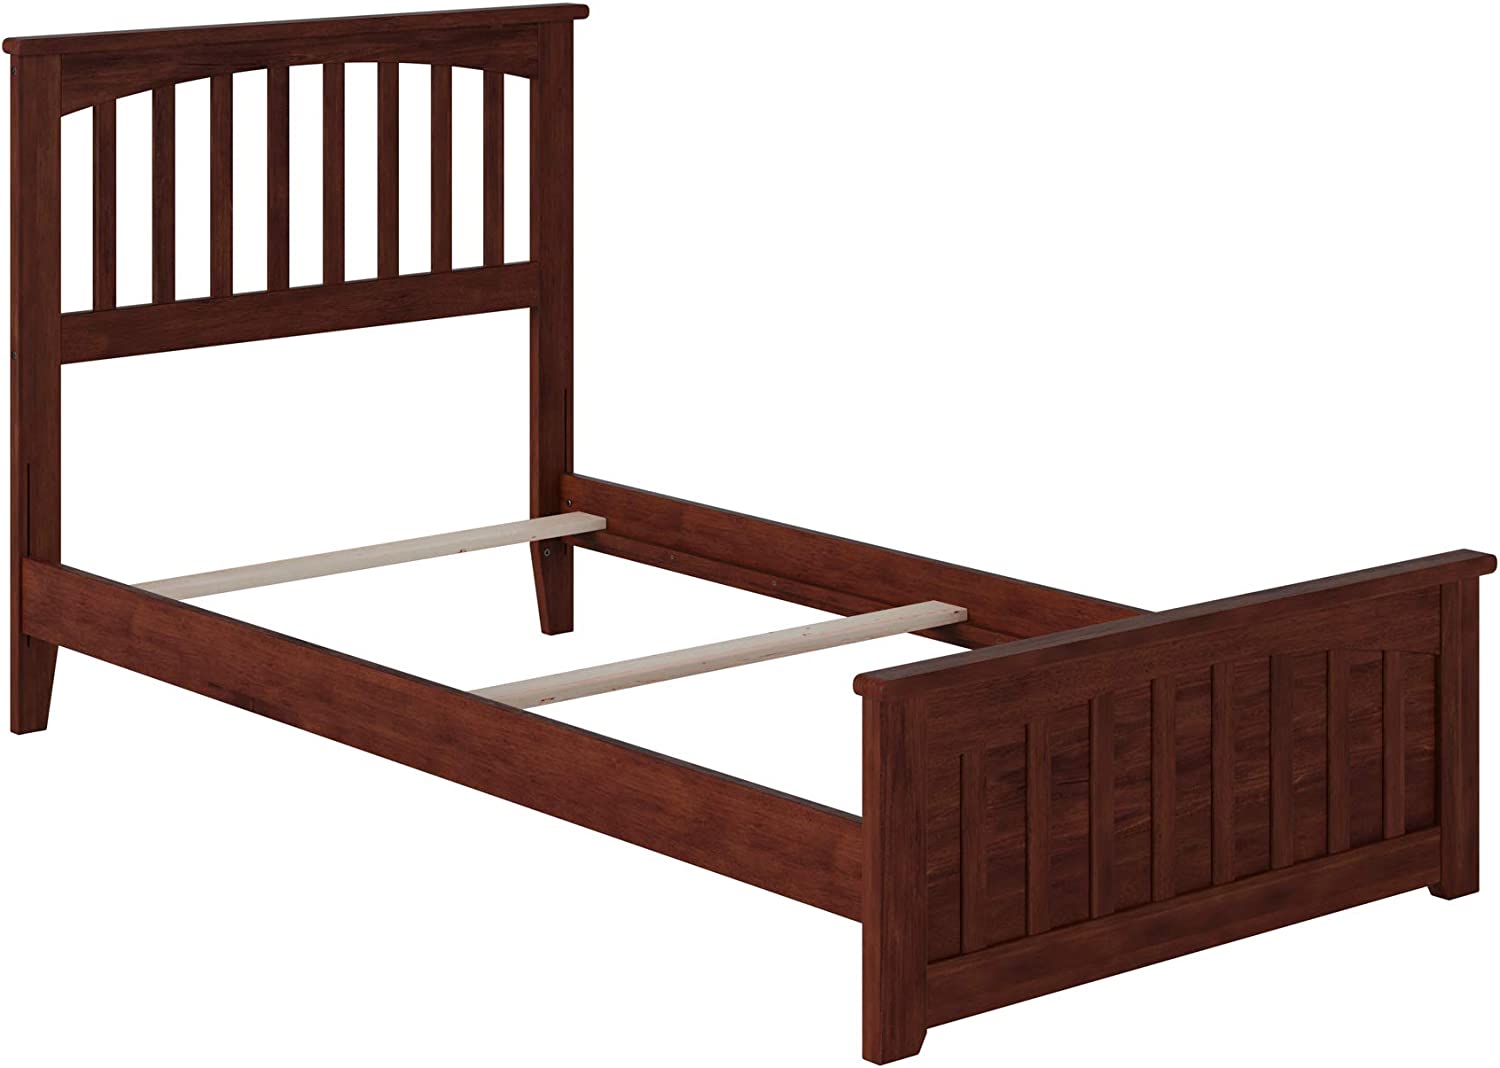 Atlantic Furniture AFI Mission Twin Spindle Bed in Walnut